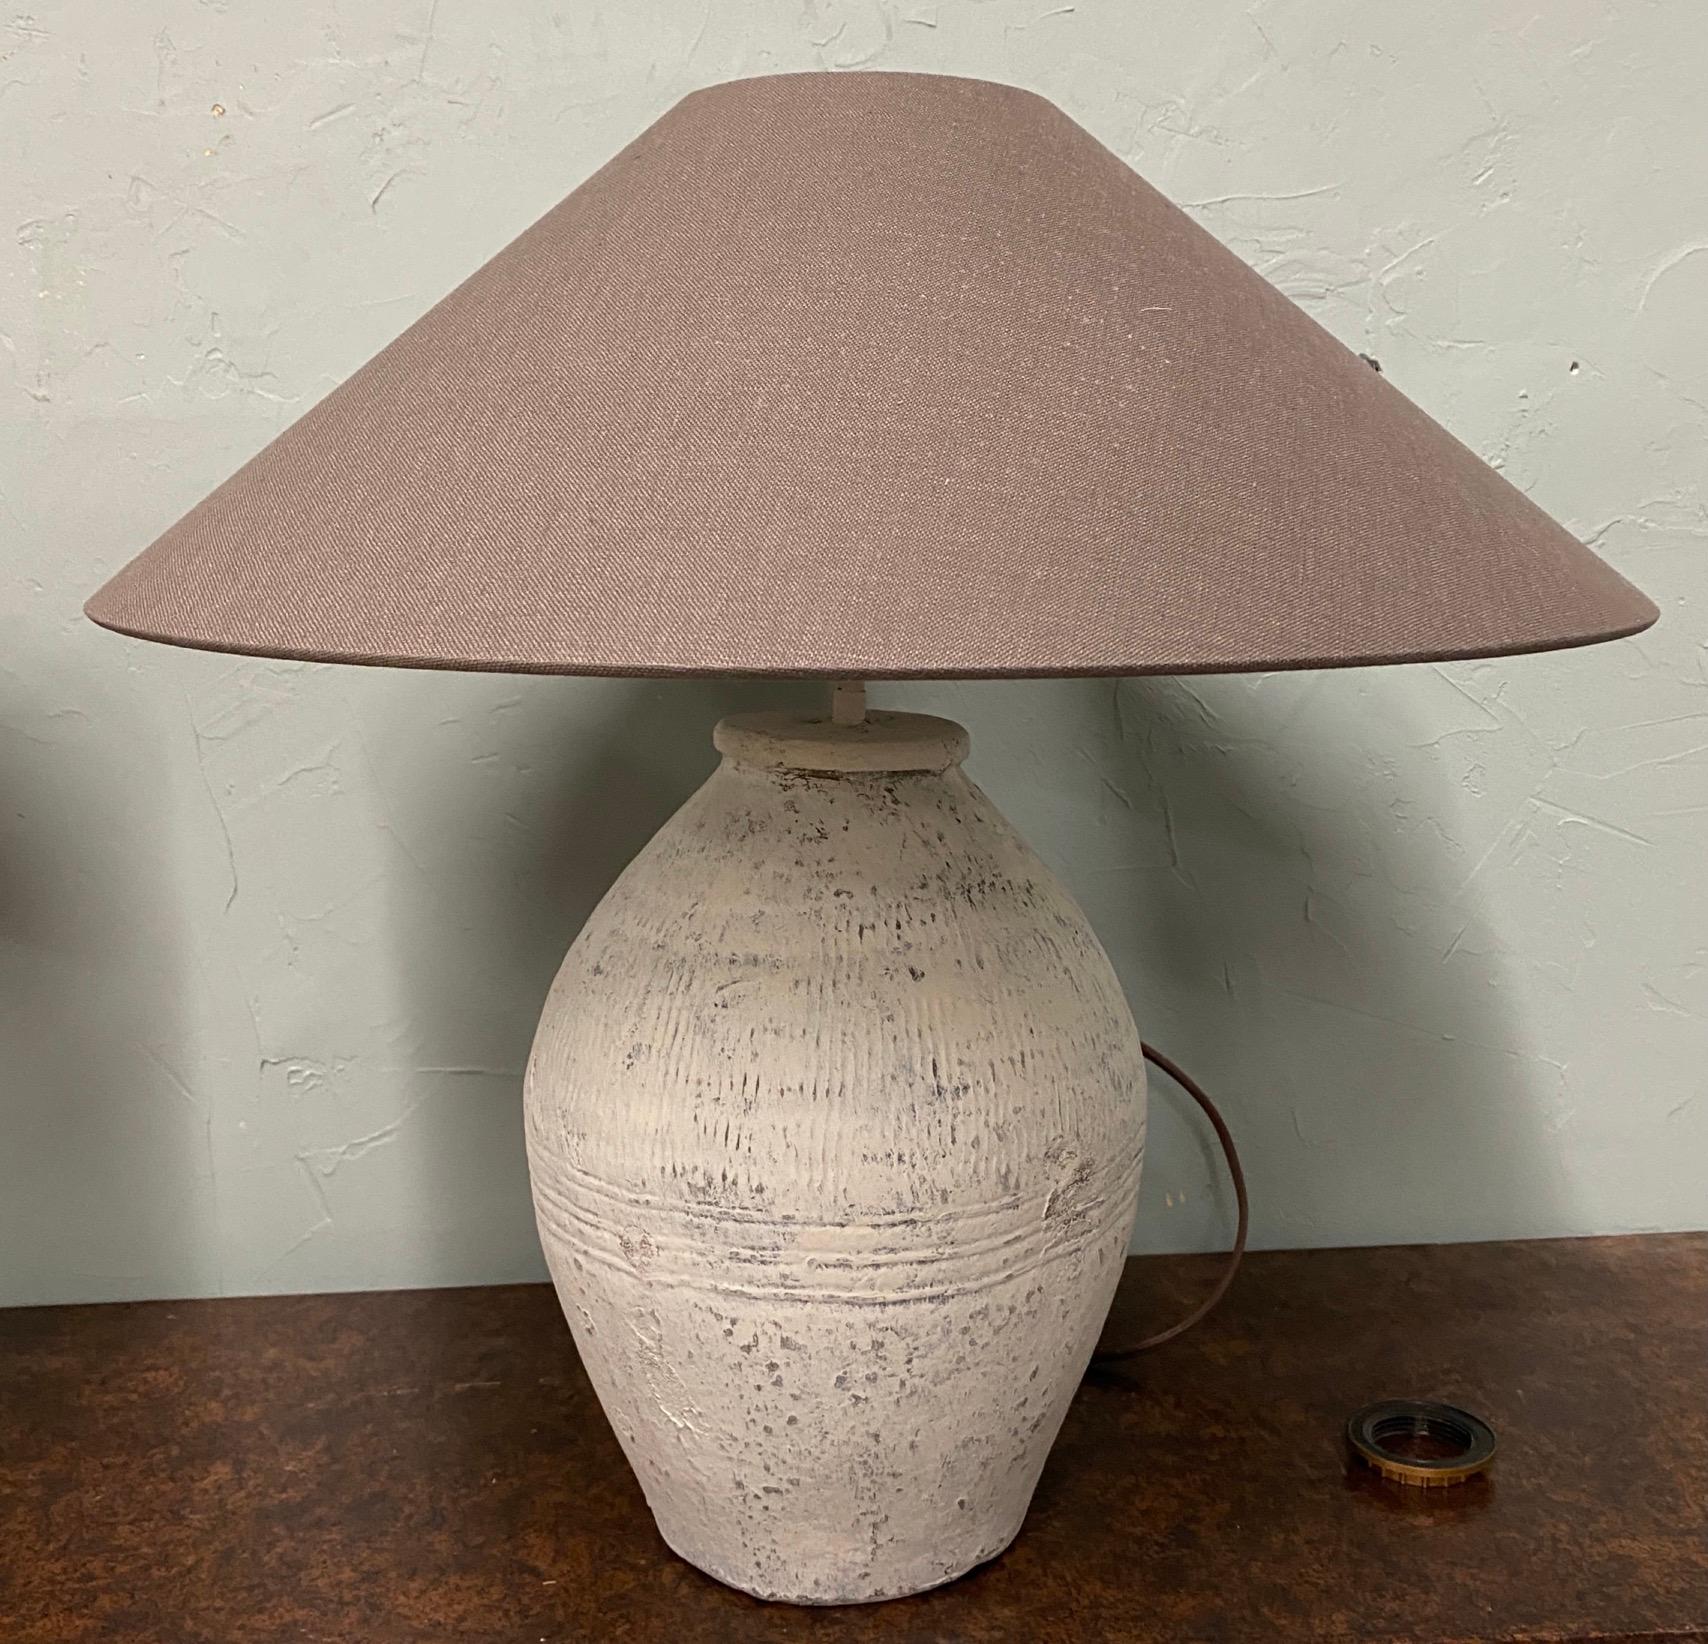 Pair of similar white painted, grey green terracotta lamp bases made from rustic vintage Chinese clay jars used for wine storage. These are not a matching pair since each of these are hand made and are not intended for decorative use. The jars are